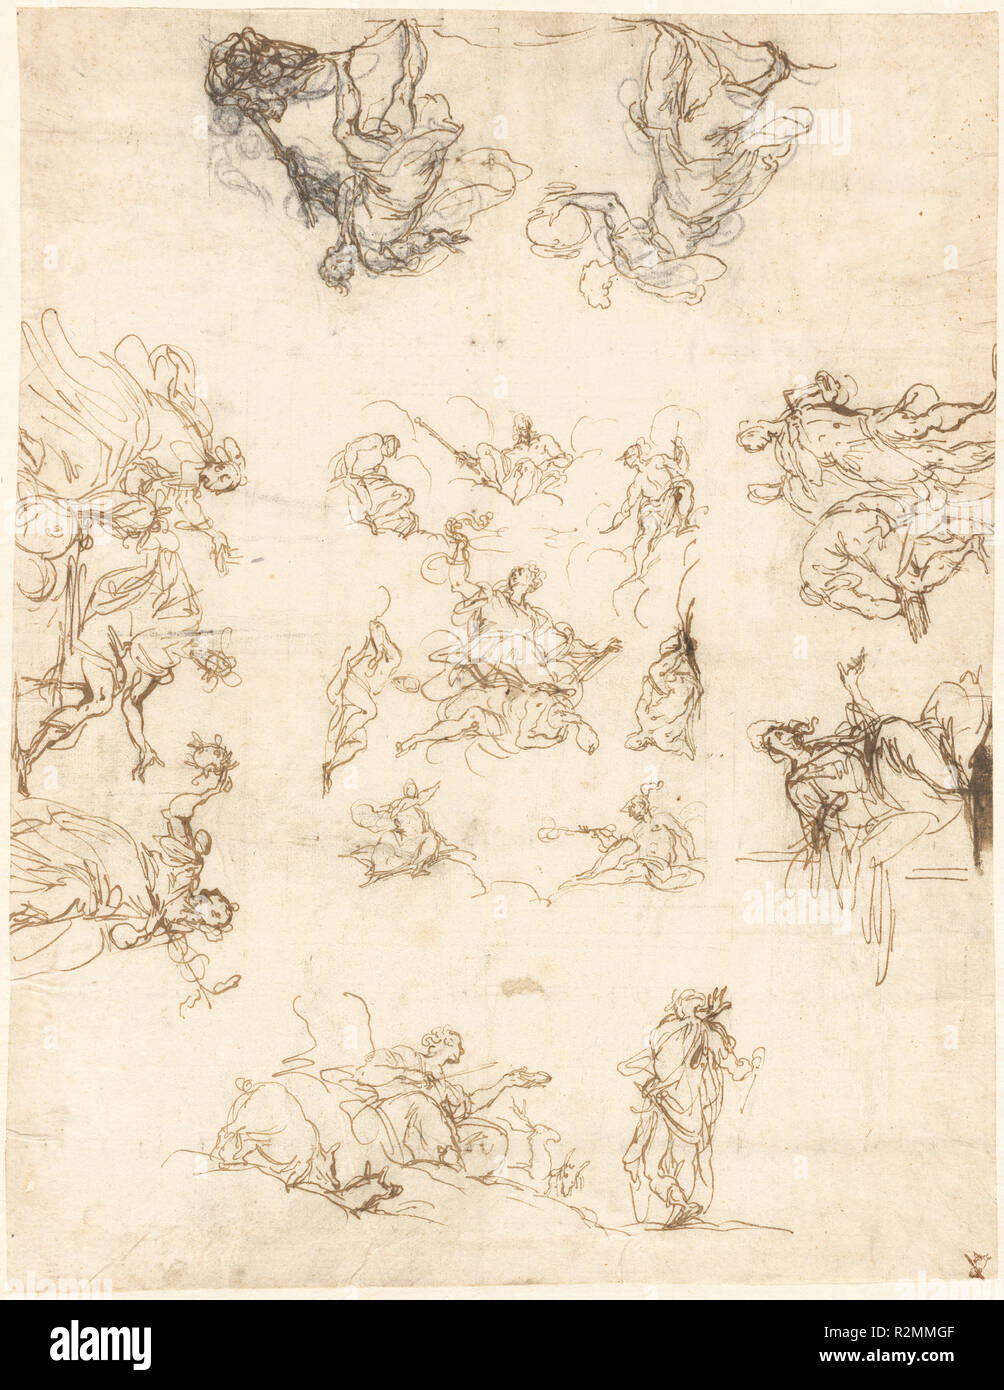 A Compartmented Ceiling with Allegories and Myths. Dated: 1590/1600. Medium: pen and brown ink over black chalk on laid paper. Museum: National Gallery of Art, Washington DC. Author: Alessandro Maganza. Stock Photo